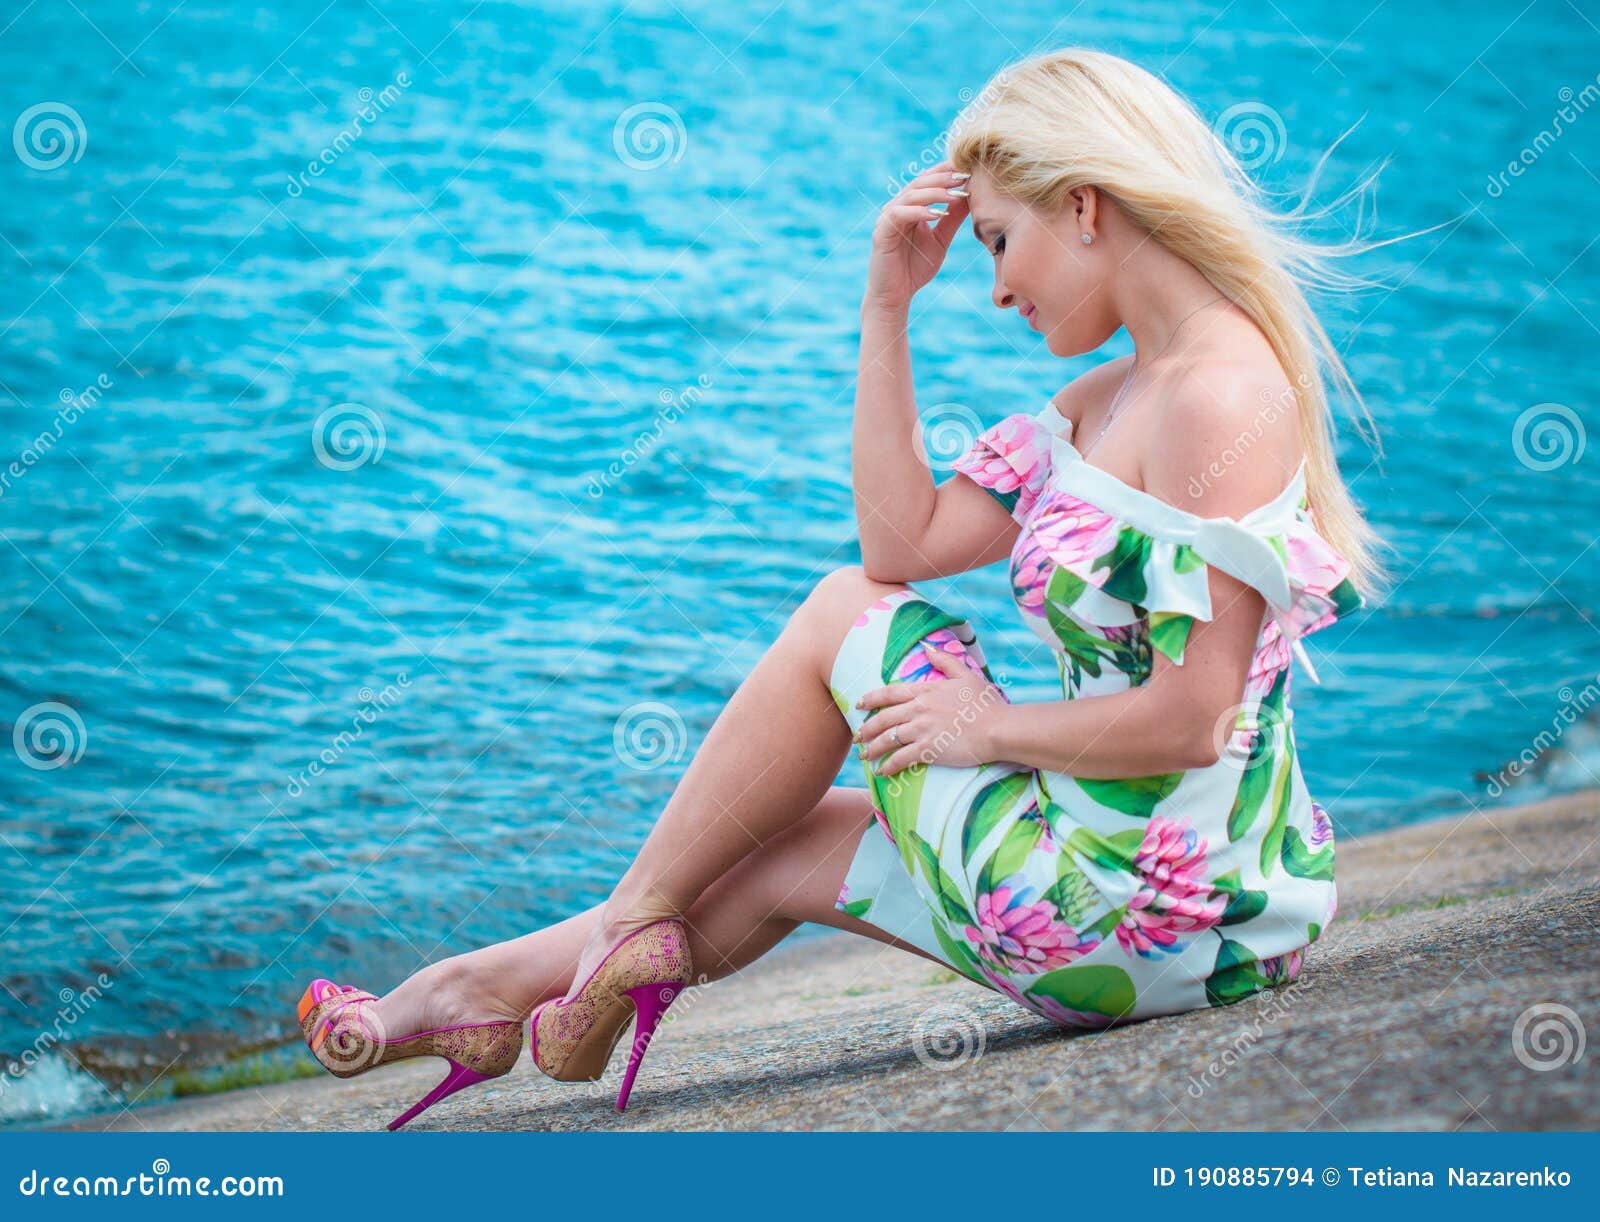 Blonde woman in a summer outfit - wide 3